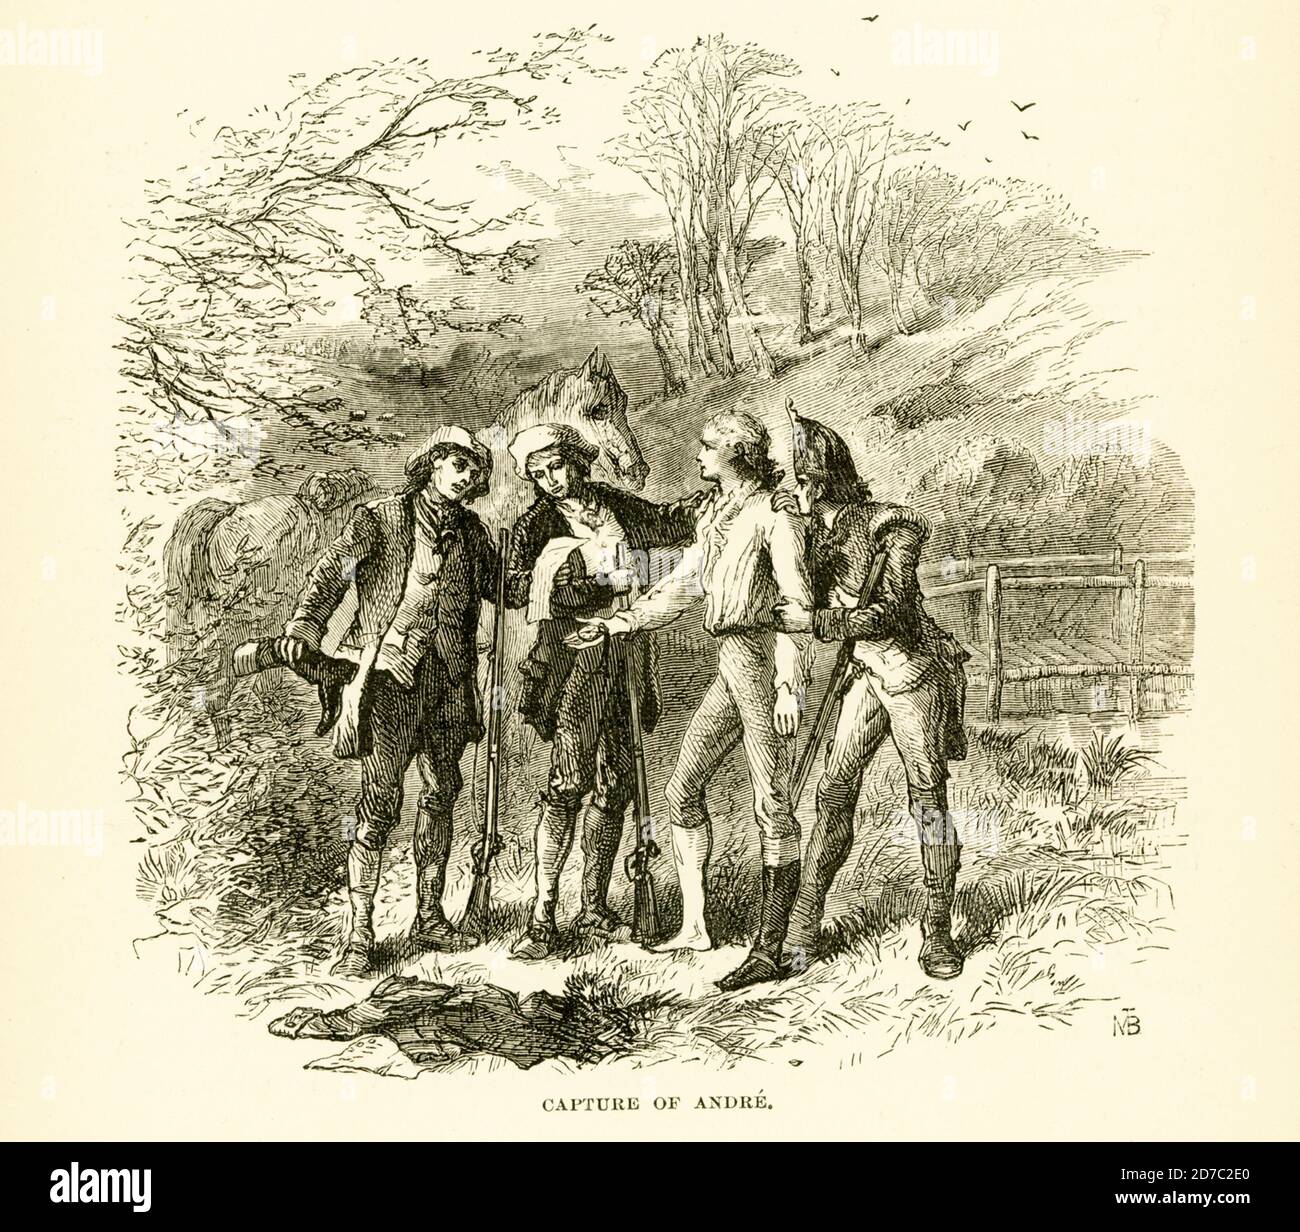 Capture of Andre in 1780. Major John Andre (1751-1780) served as a British spy during the American Revolution (1775-1783). He was found guilty of negotiating with Benedict Arnold for the betrayal of West Point and, after a trial by court-martial, was found guilty. He was hanged in Tappan, New York. Stock Photo